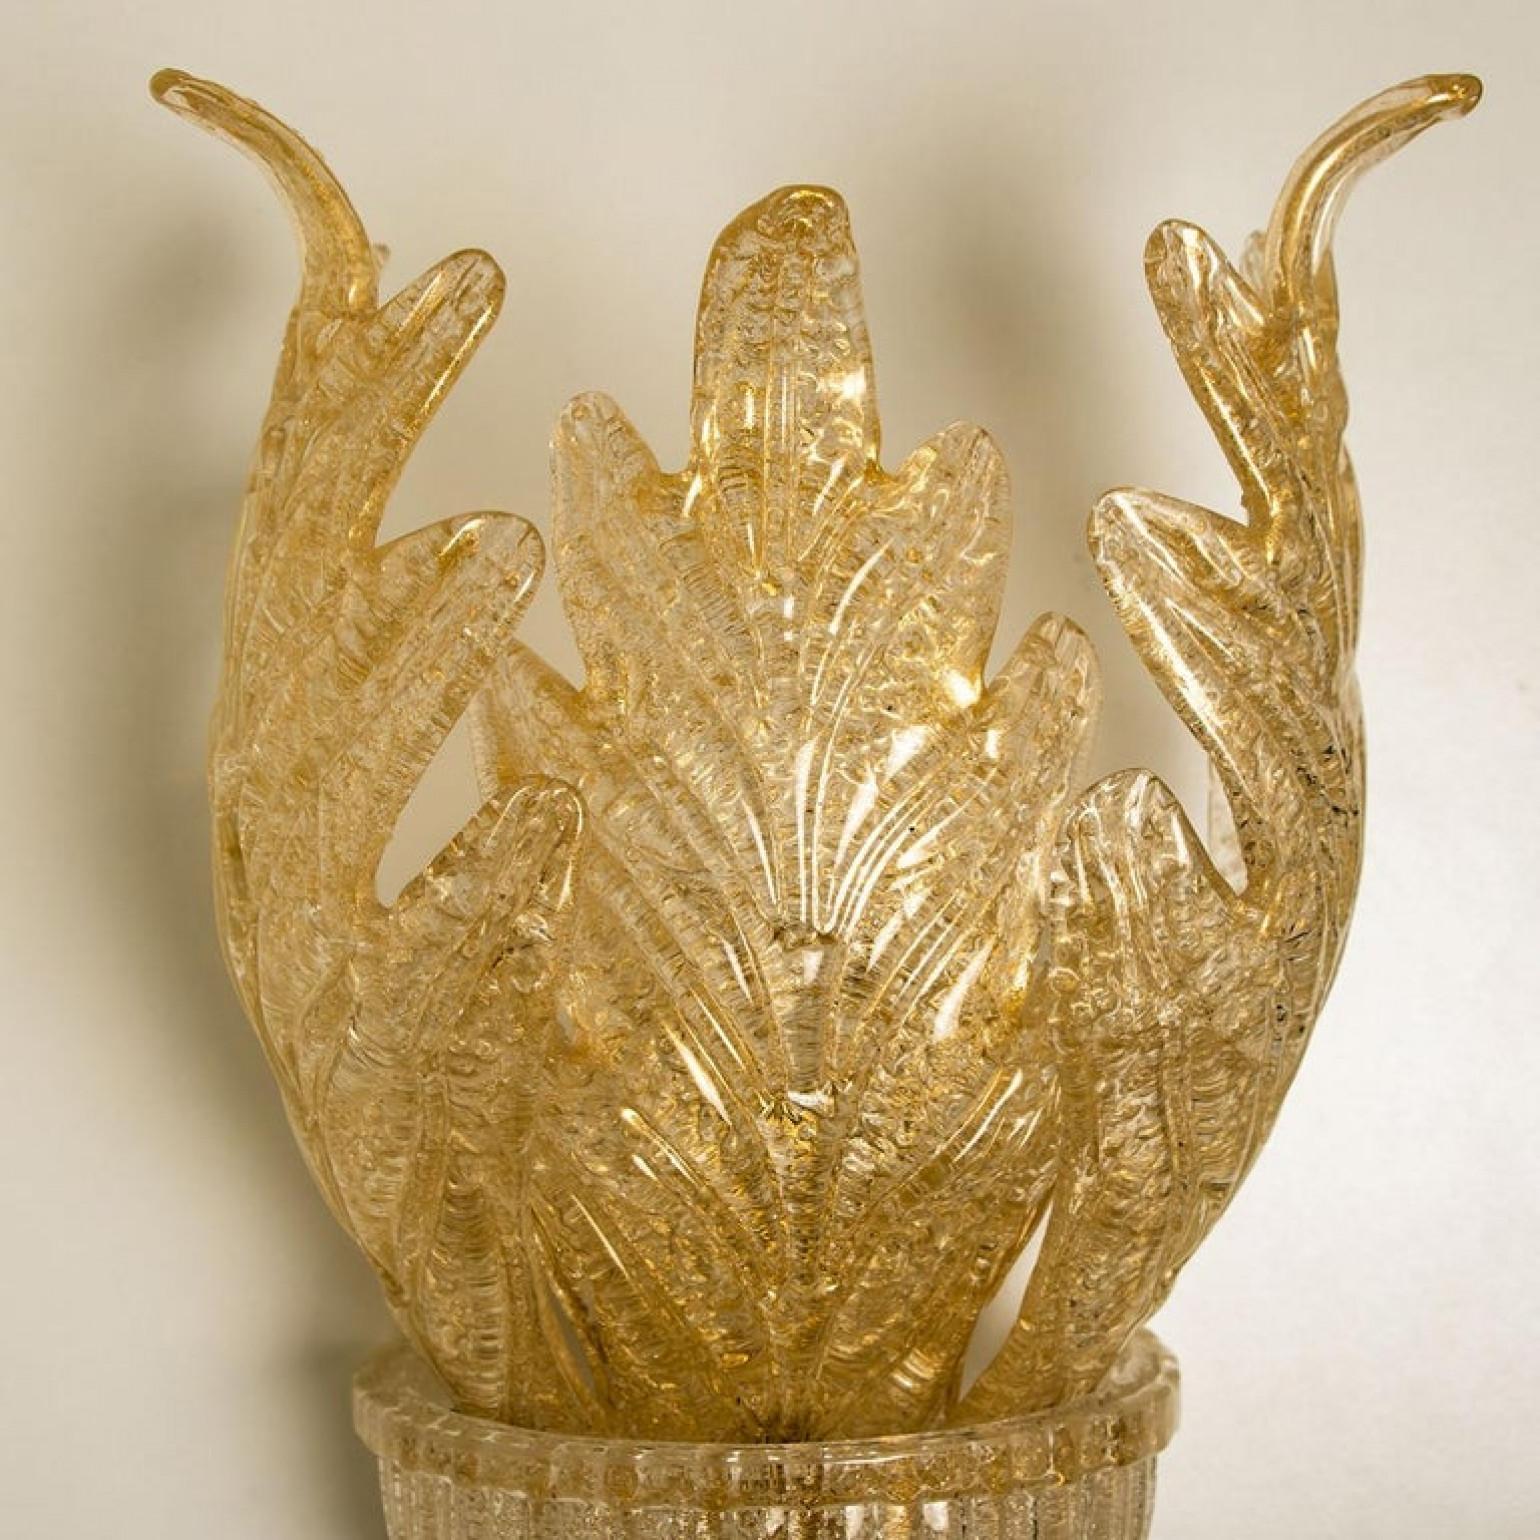 1 of the 6 XL Wall Sconces Barovier & Toso Murano Glass and Gold-Plated, 1960 For Sale 3